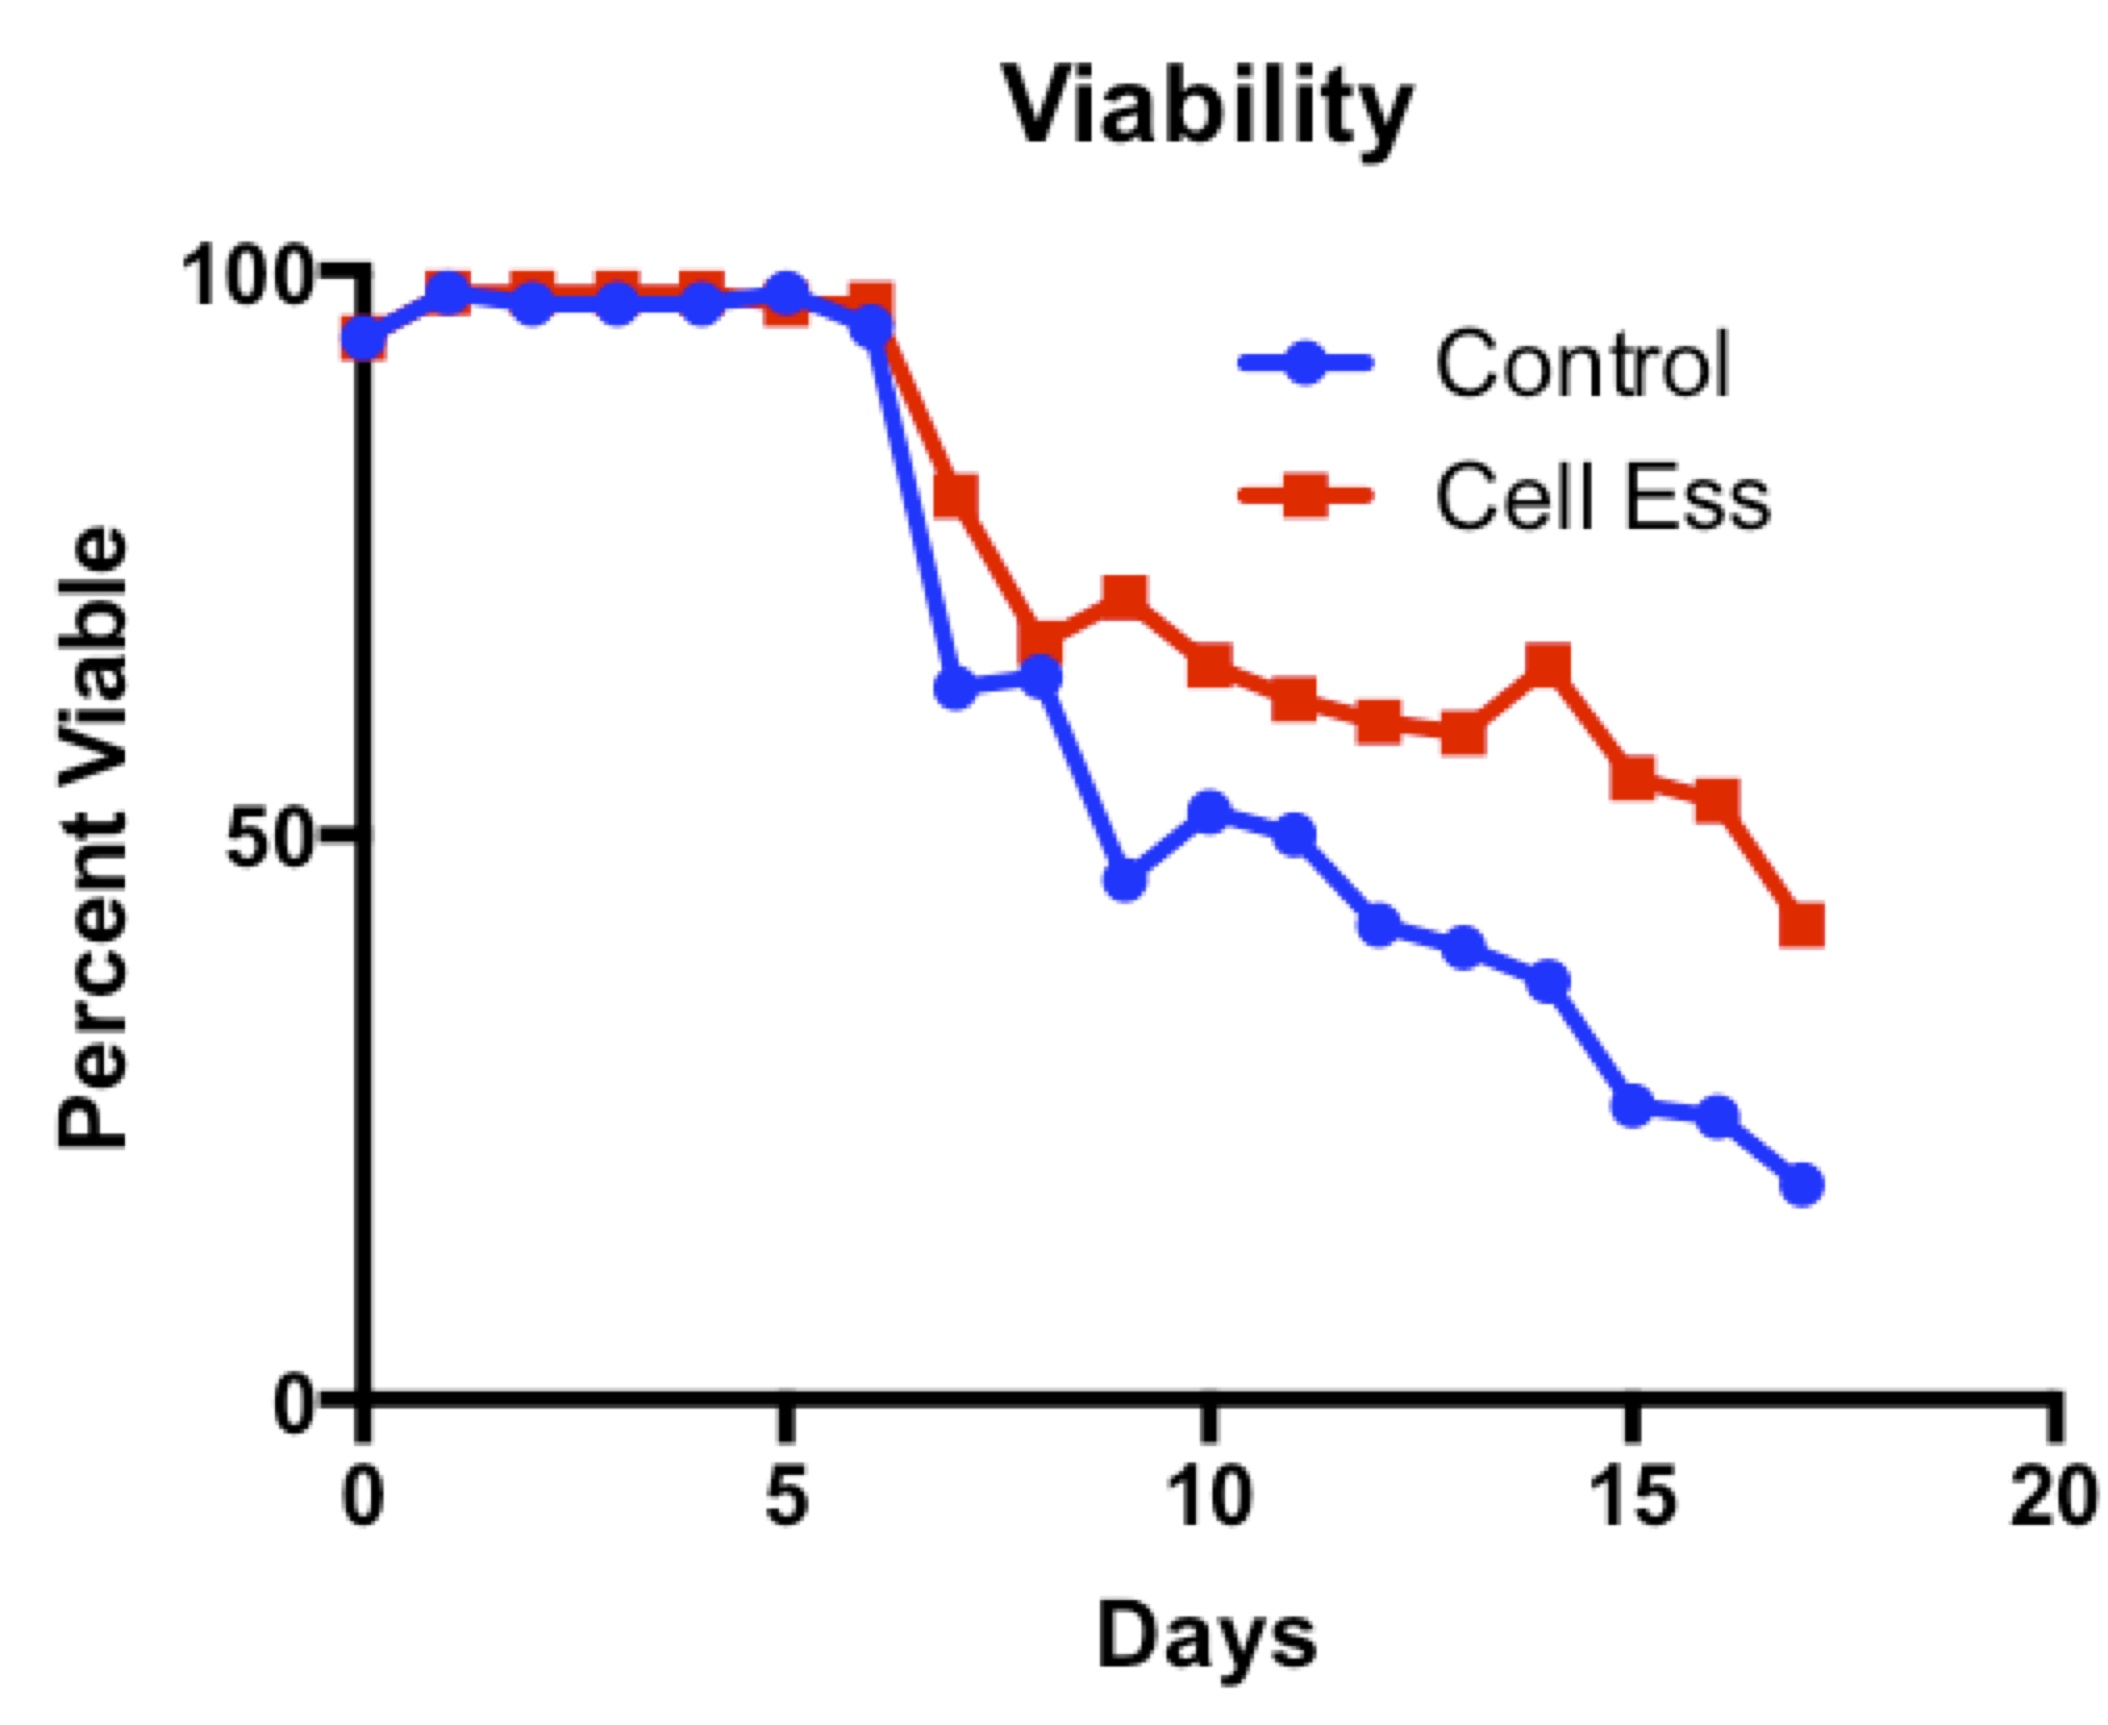 Cell-Ess has been shown to improve viability during stationary phase, when studies show that productivity is highest